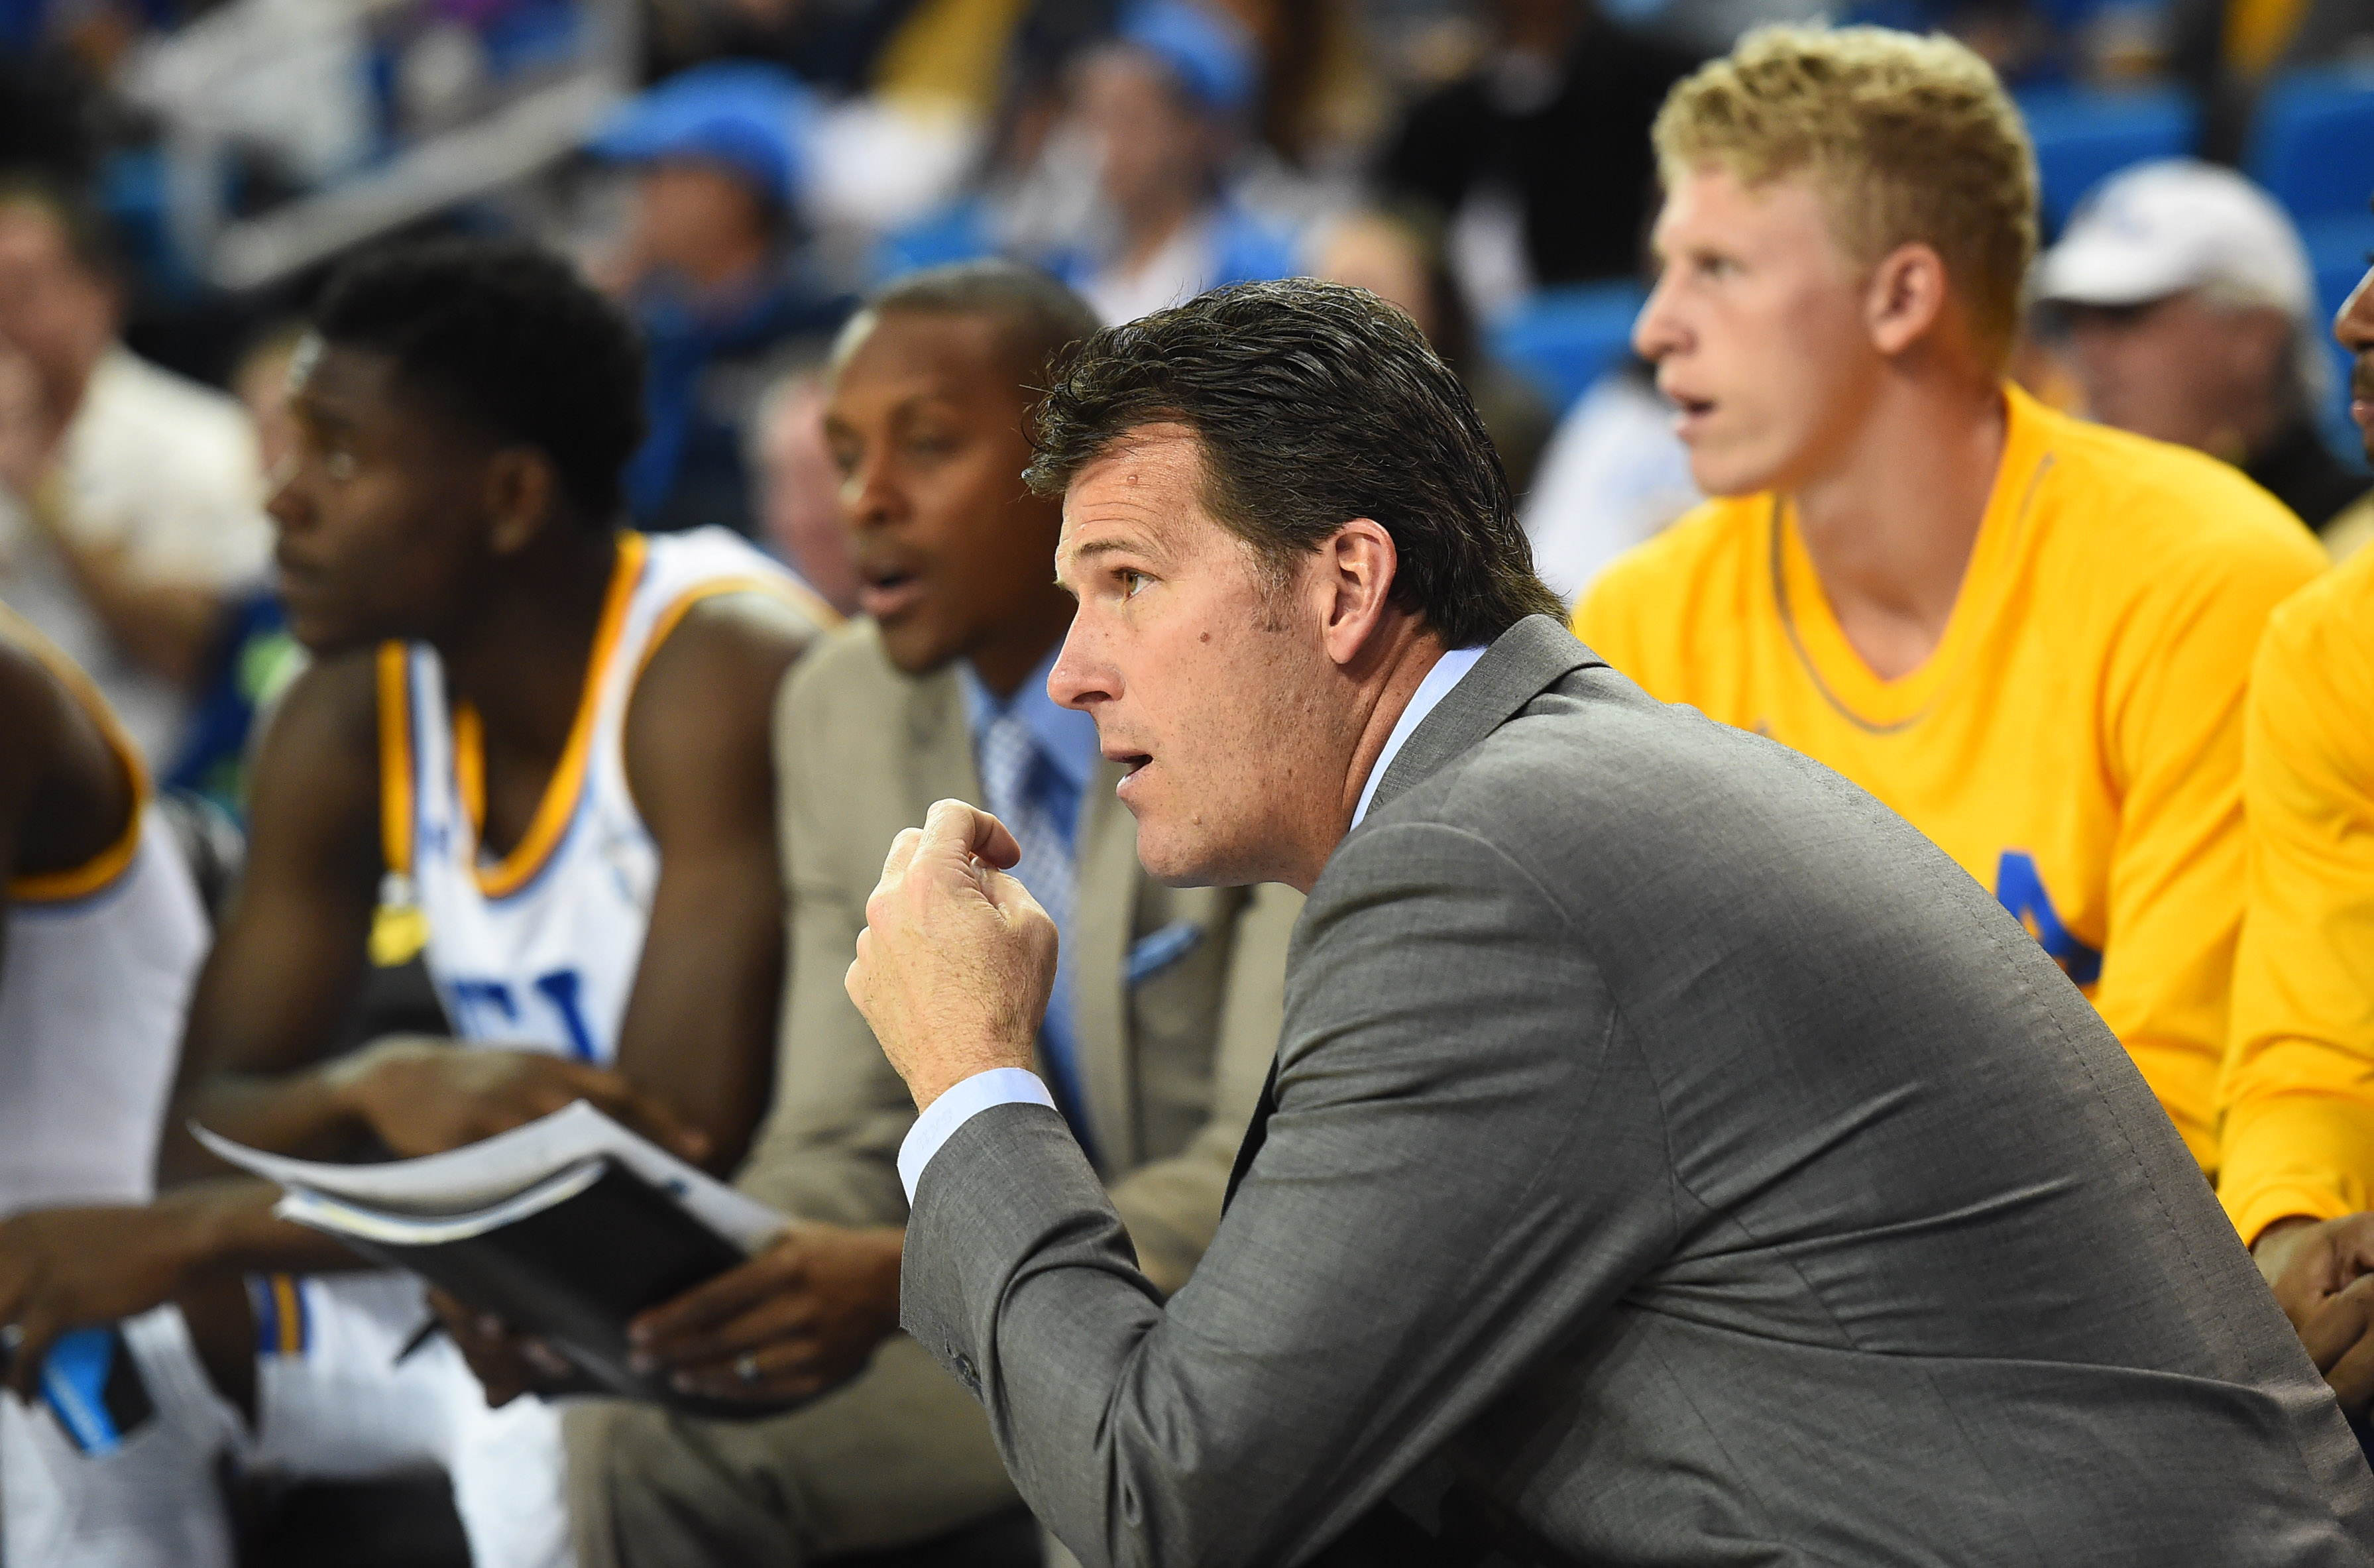 Steve Alford guided UCLA to some impressive nonconference wins, but the Bruins have now lost their first two Pac-12 games. (Andy Holzman/Staff)